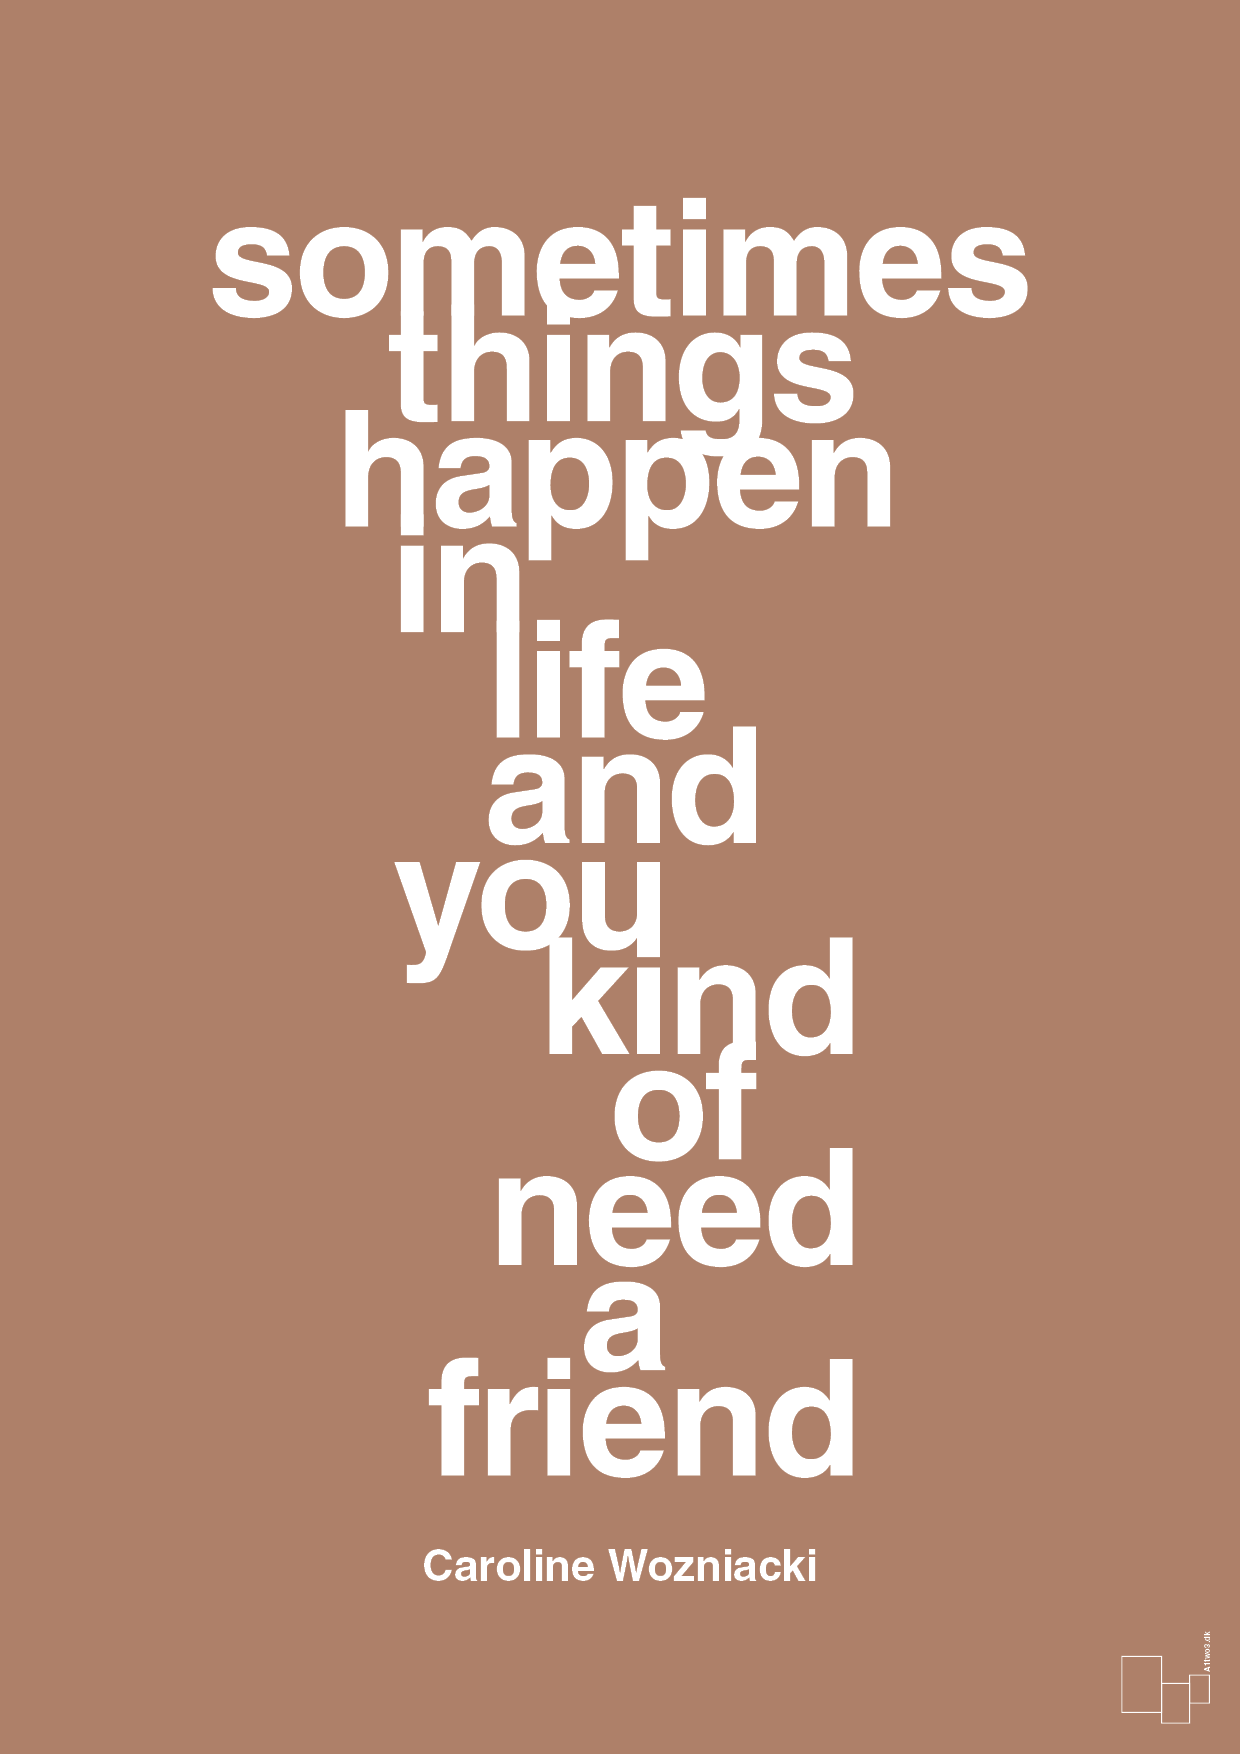 sometimes things happen in life and you kind of need a friend - Plakat med Citater i Cider Spice